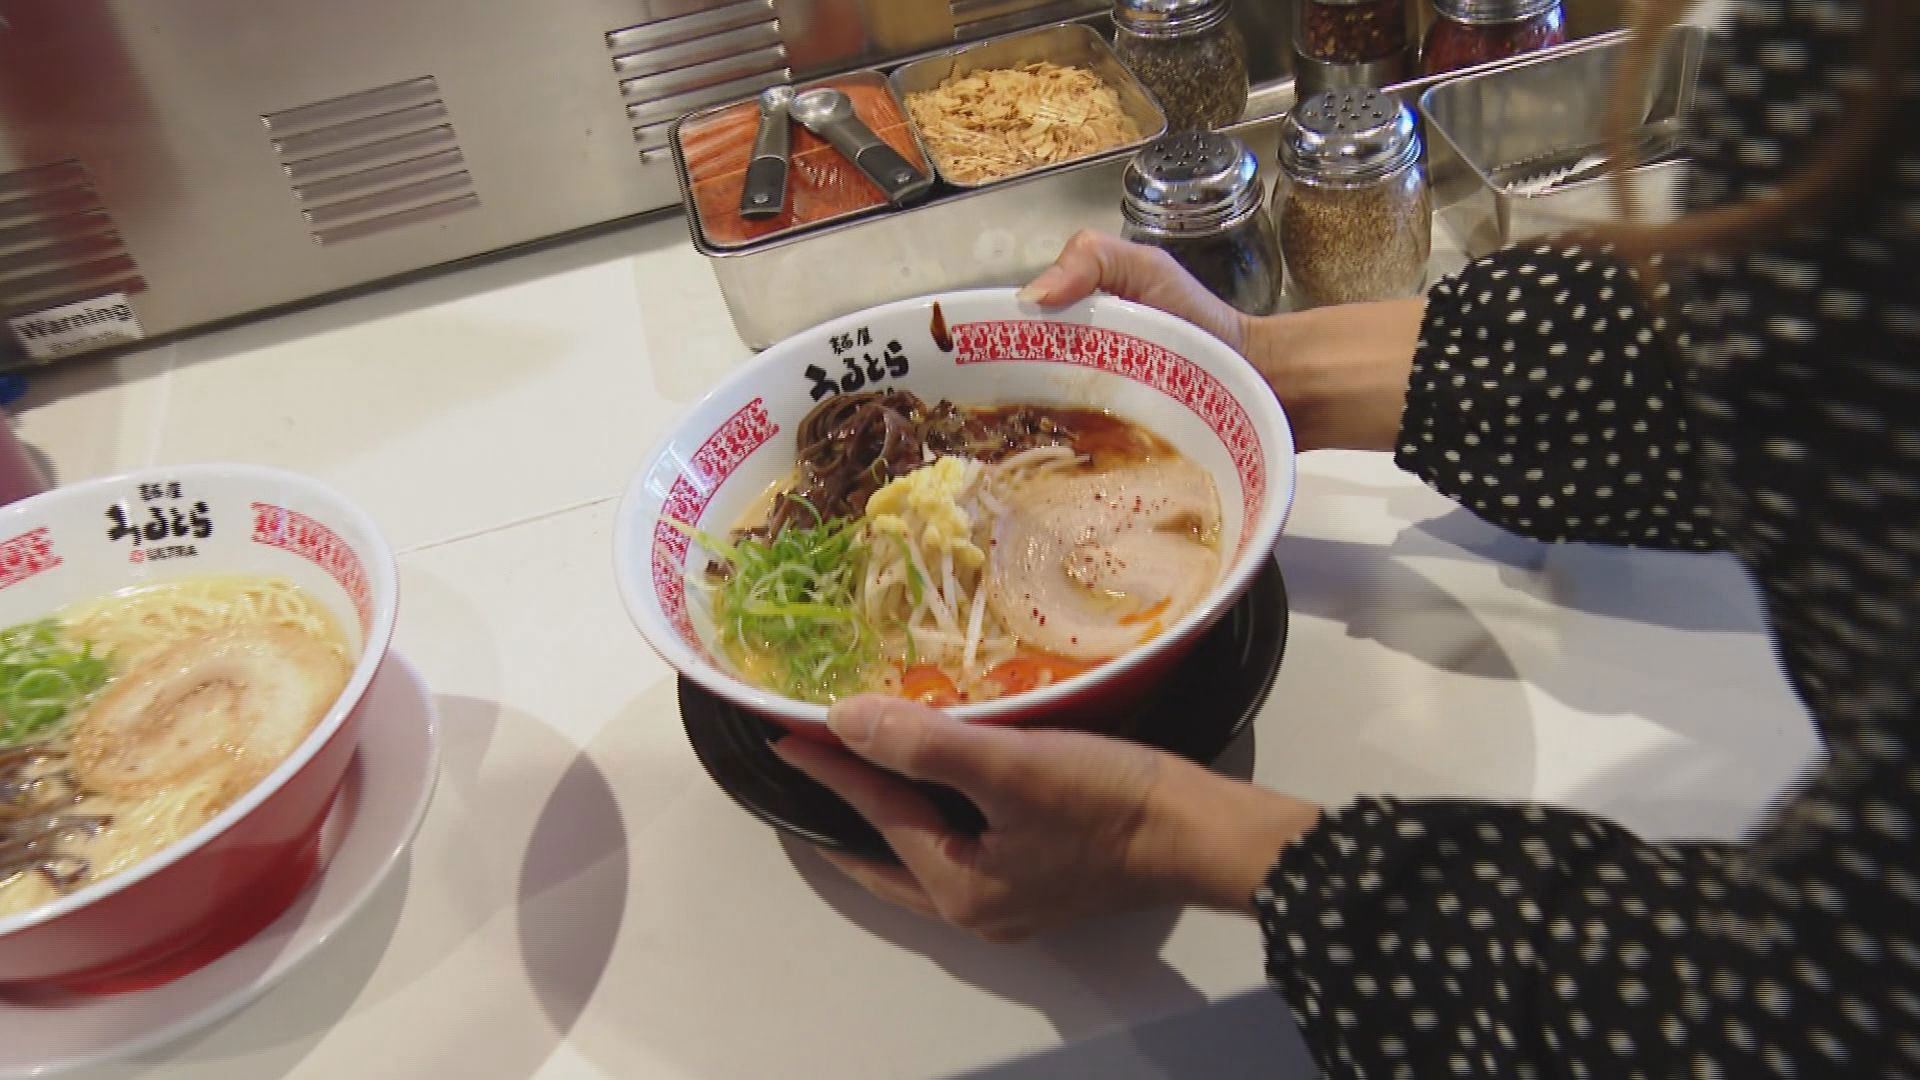 Food critics have called Menya Ultra's ramen the best in the United States.